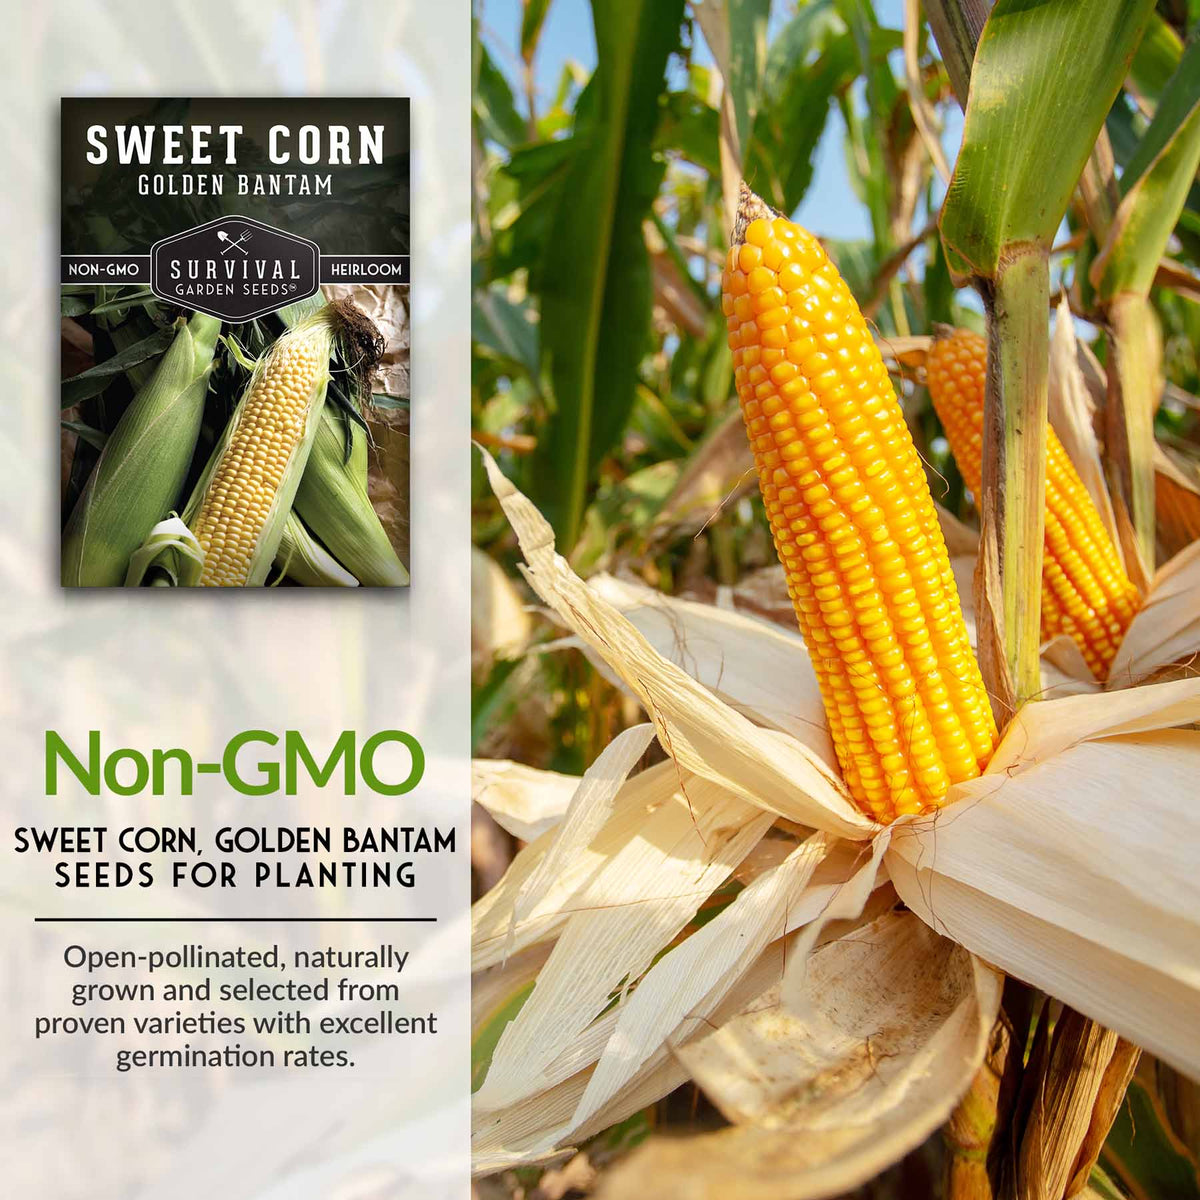 Non-GMO Sweet Corn Seeds for planting